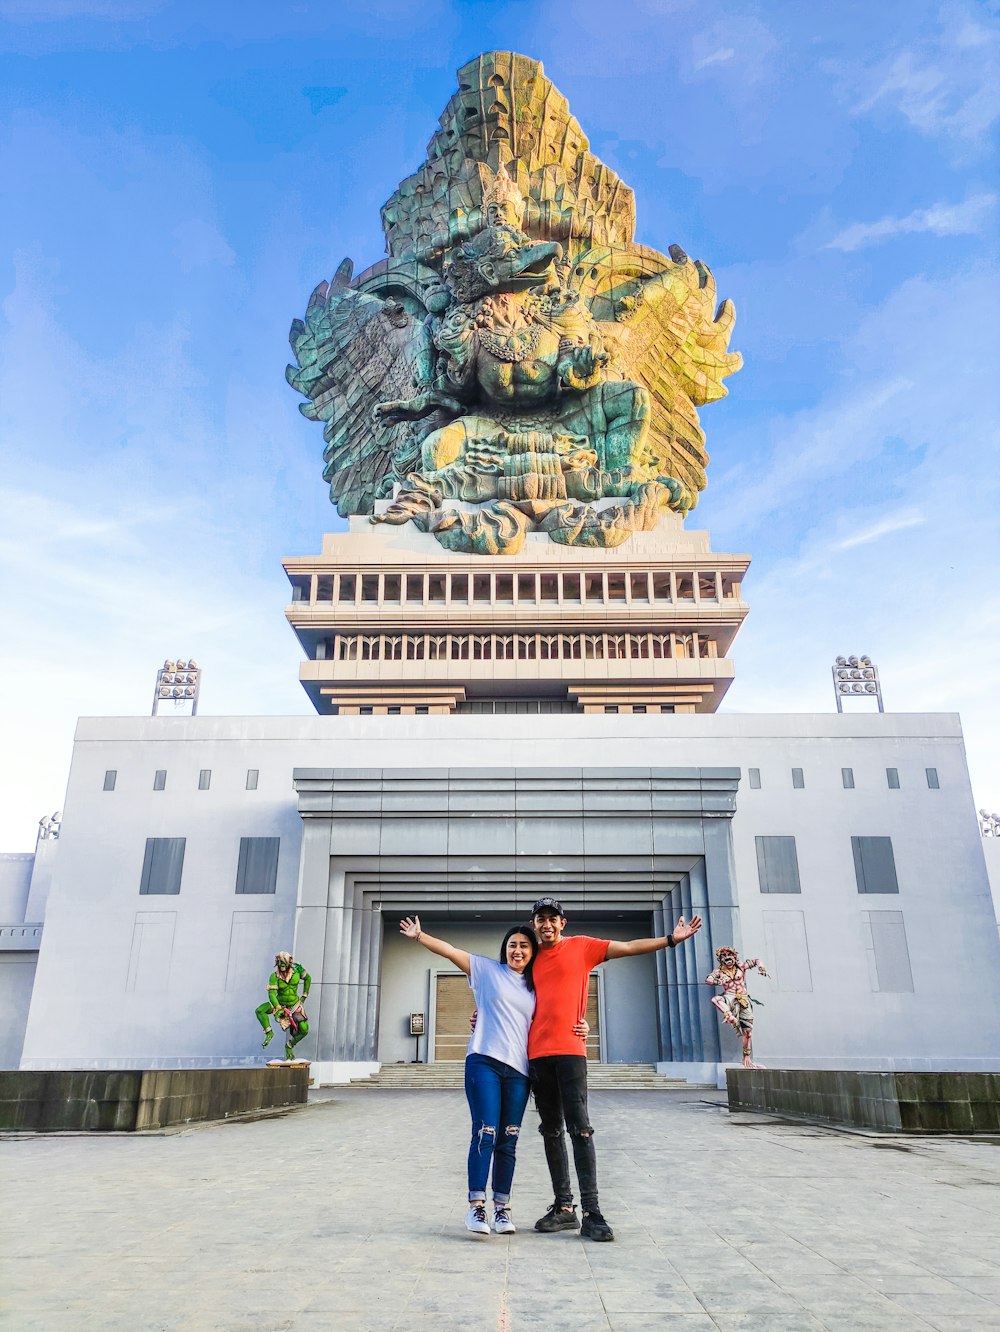 a man and woman posing in front of a building with a tower